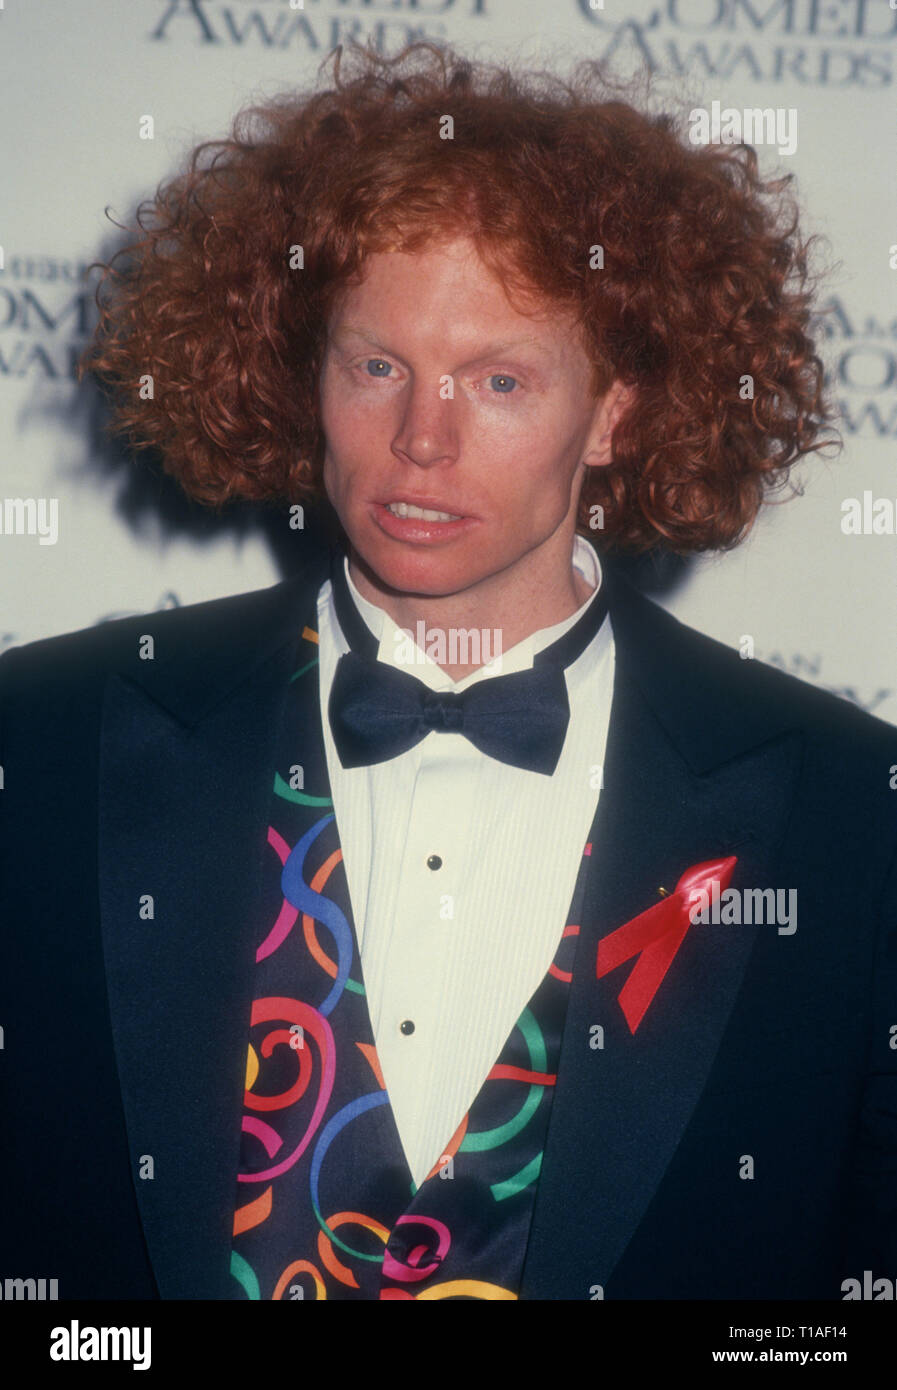 tegnebog Udlænding trappe LOS ANGELES, CA - MARCH 6: Comedian Carrot Top, aka Scott Thompson attends  the Eighth Annual American Comedy Awards on March 6, 1994 at the Shrine  Auditorium in Los Angeles, California. Photo